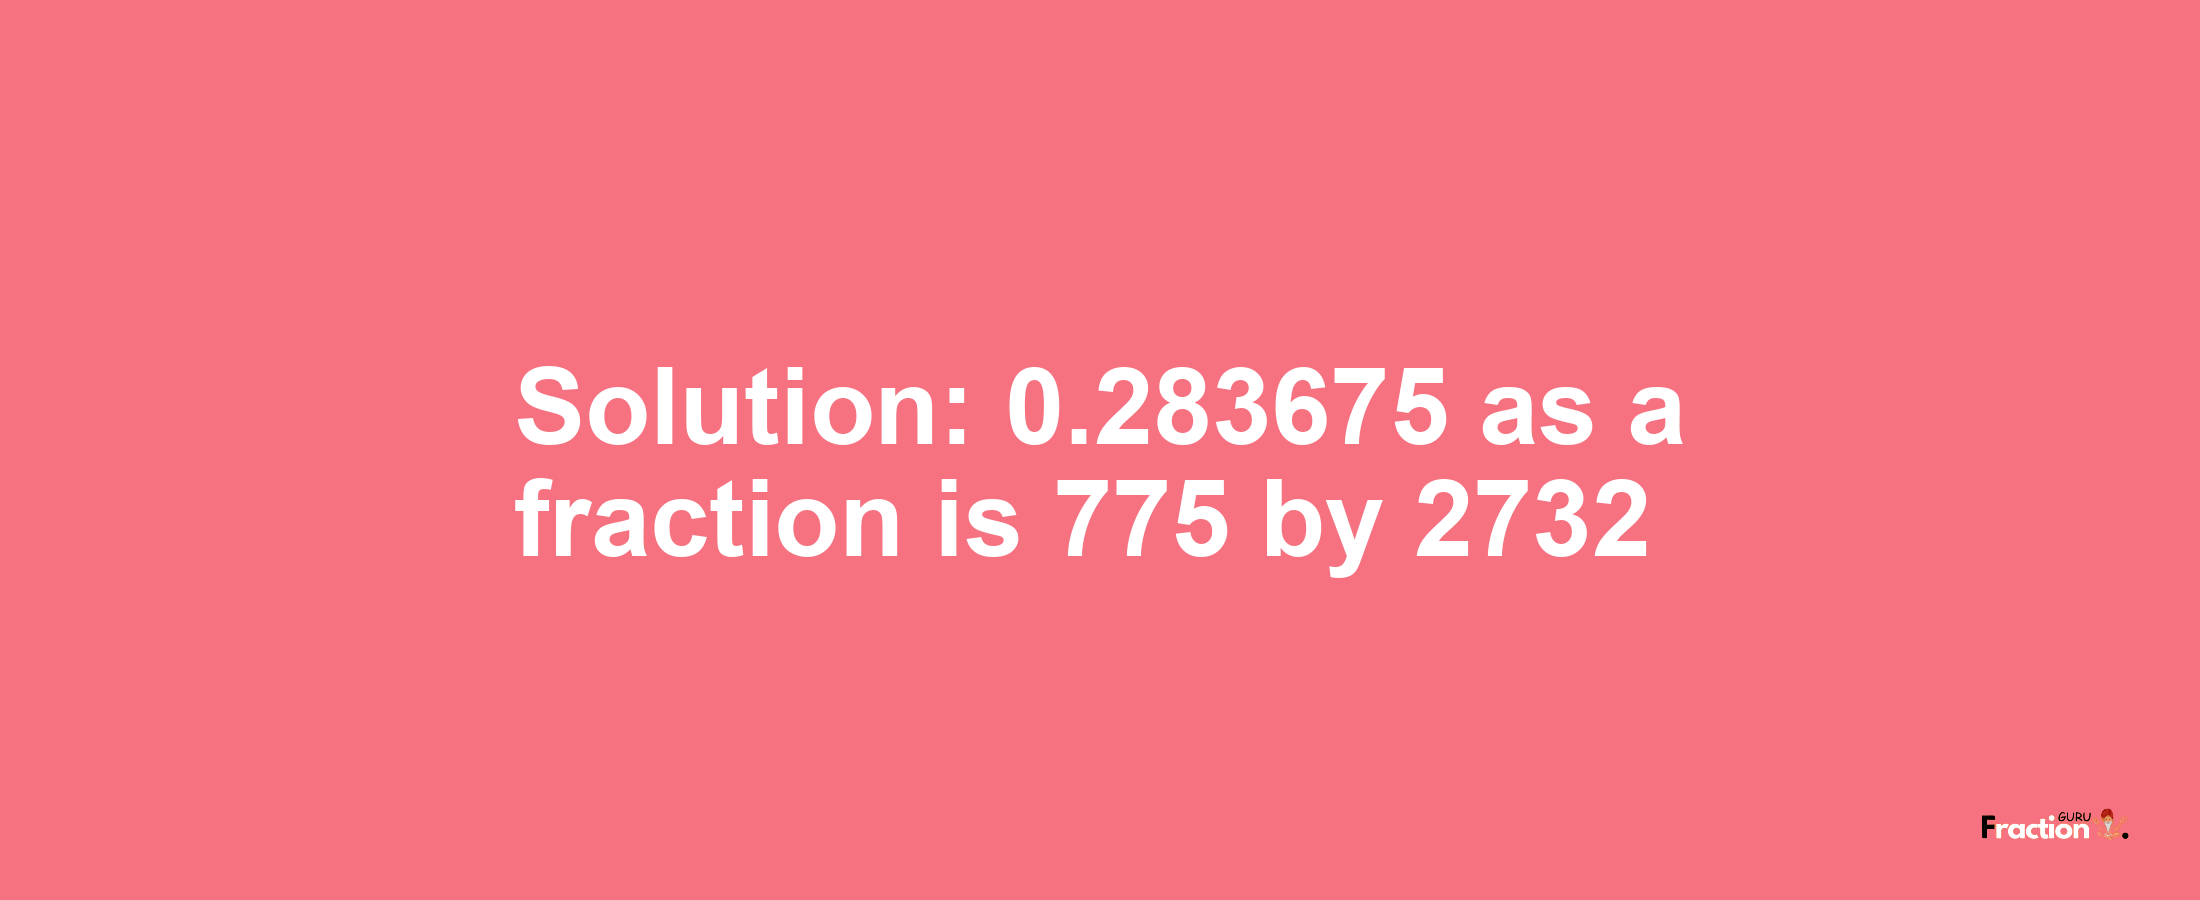 Solution:0.283675 as a fraction is 775/2732